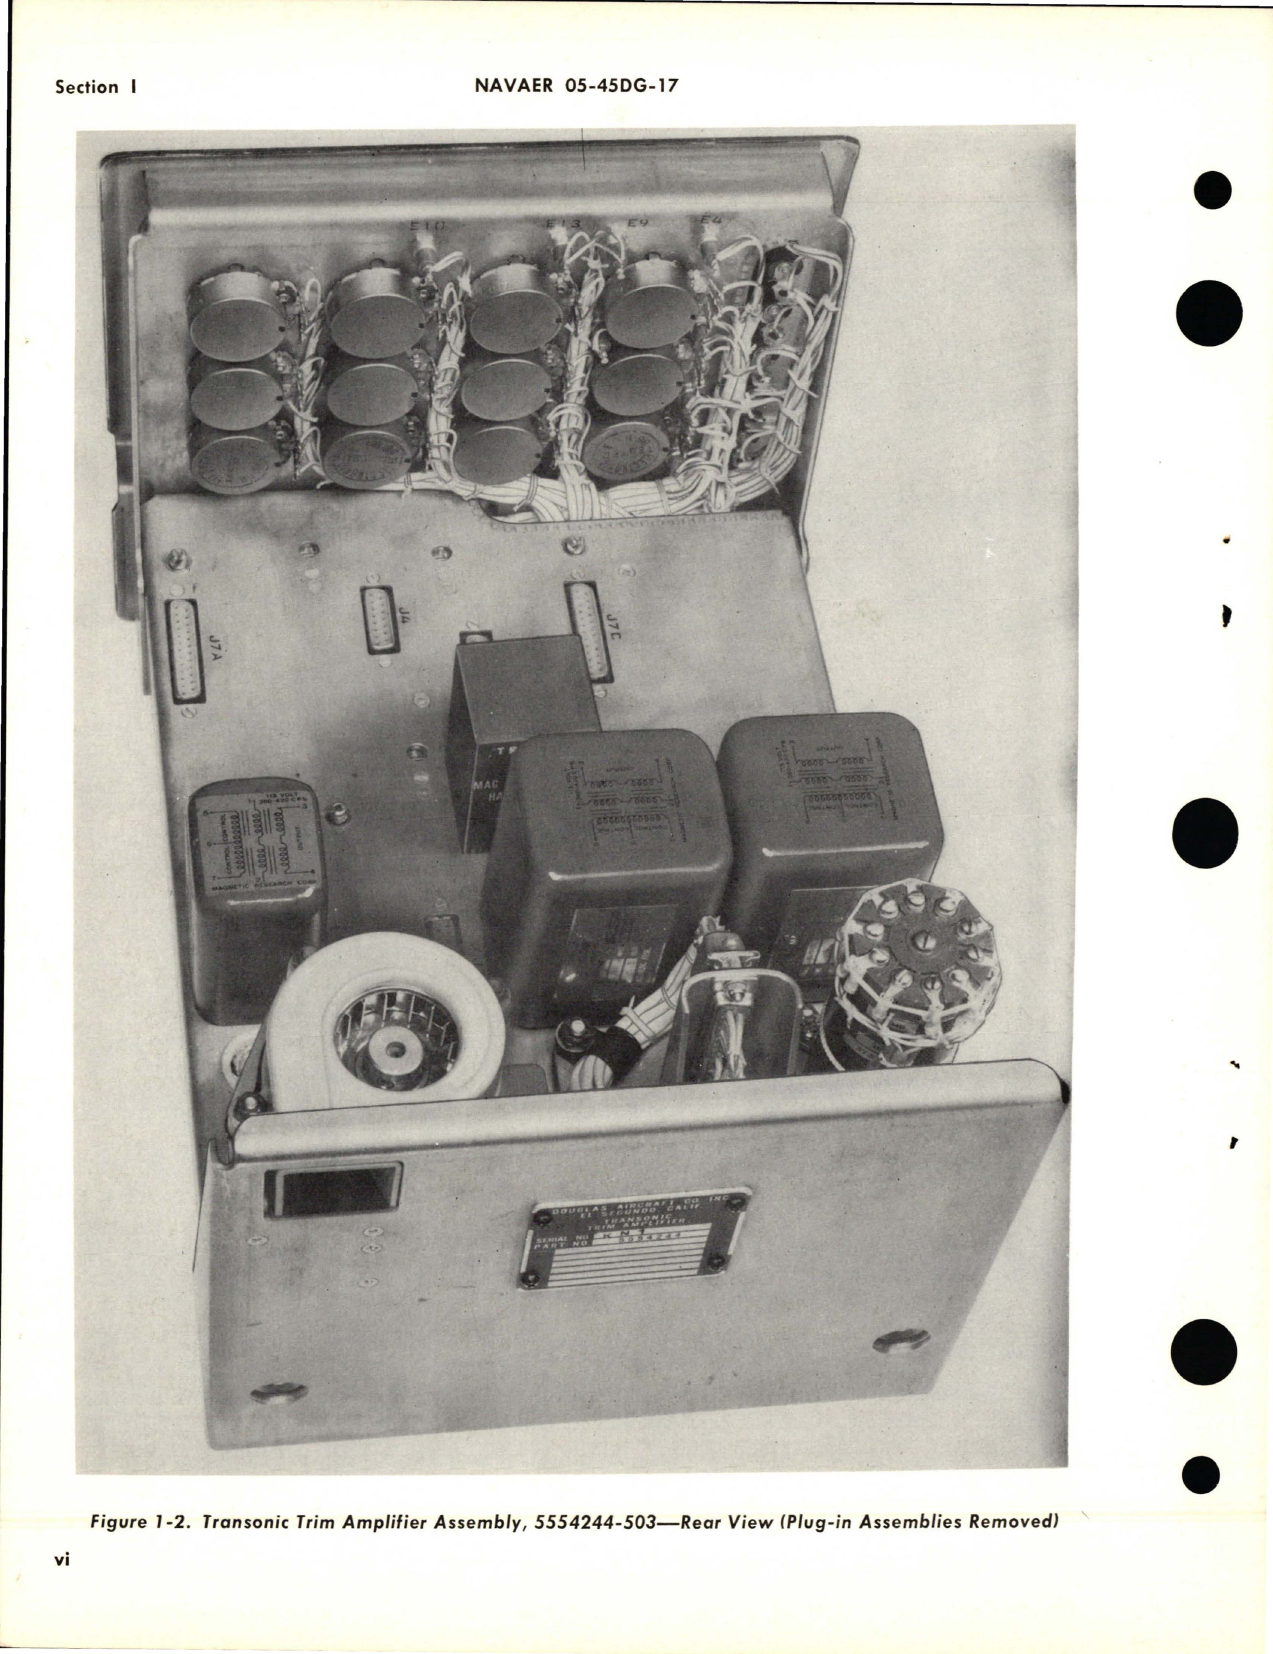 Sample page 8 from AirCorps Library document: Overhaul Instructions for Transonic Trim Amplifier Assembly - Parts 5554244-503, 5554244-507, and 554244-509